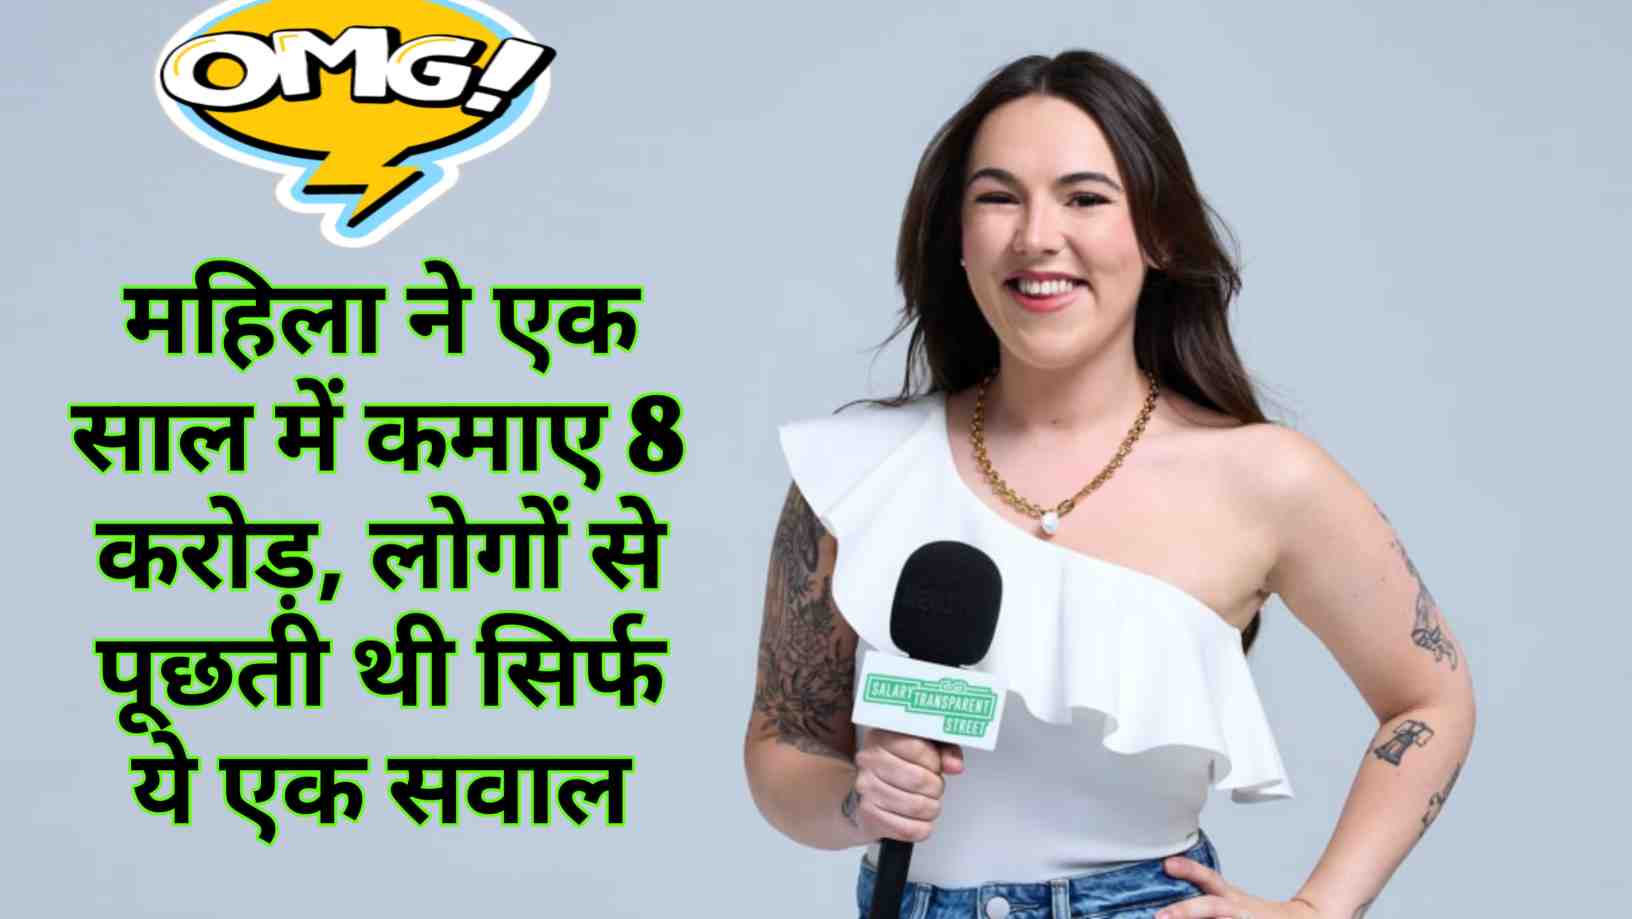 Woman earned 8 crores in one year by asking only this one question to people